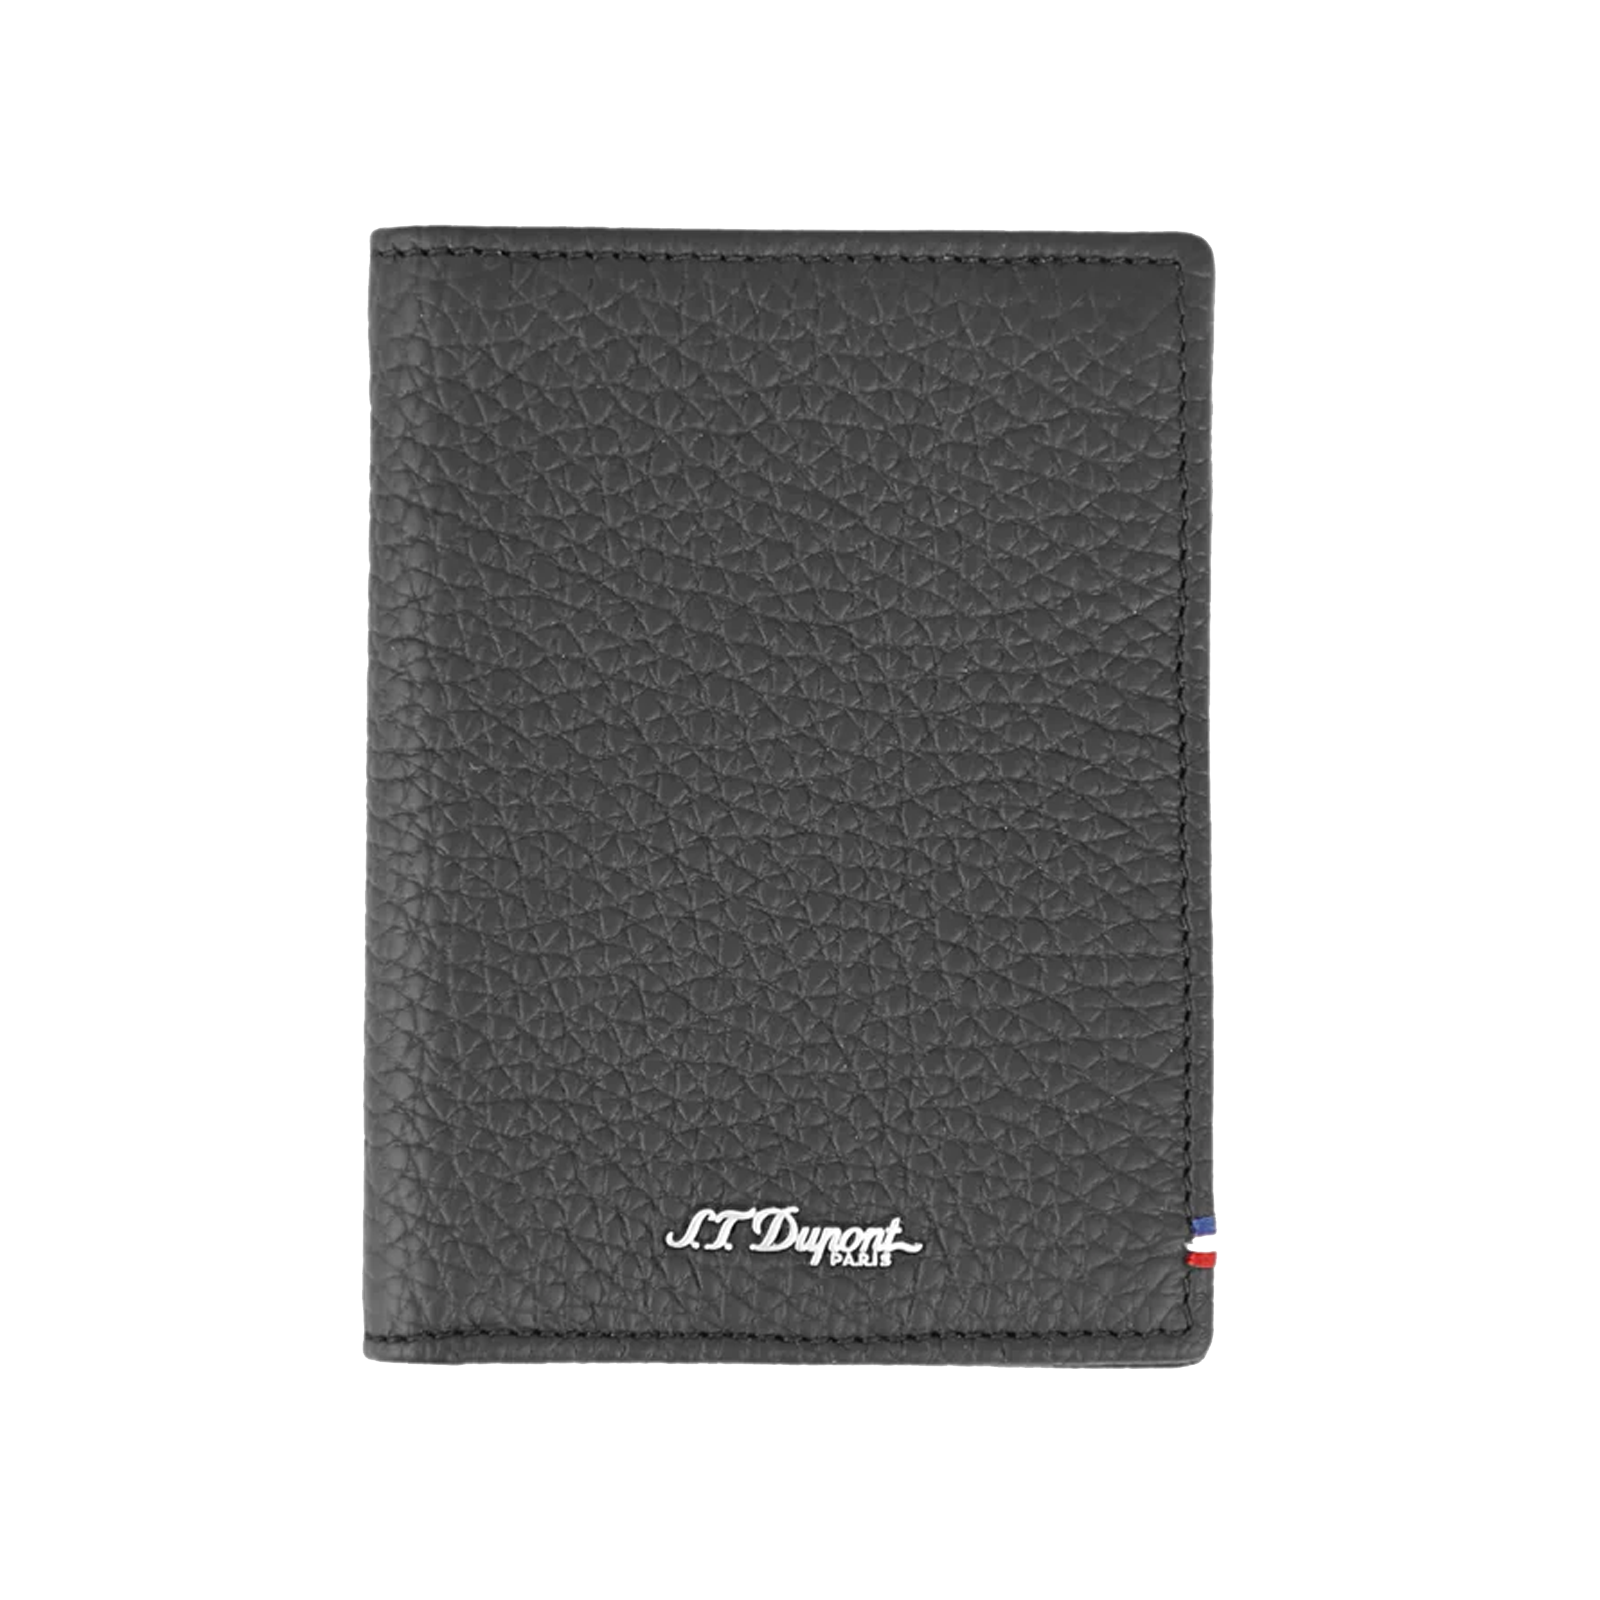 S.T. Dupont Black Grained Neo Capsule 6-Card Wallet – The Pleasure of  Writing